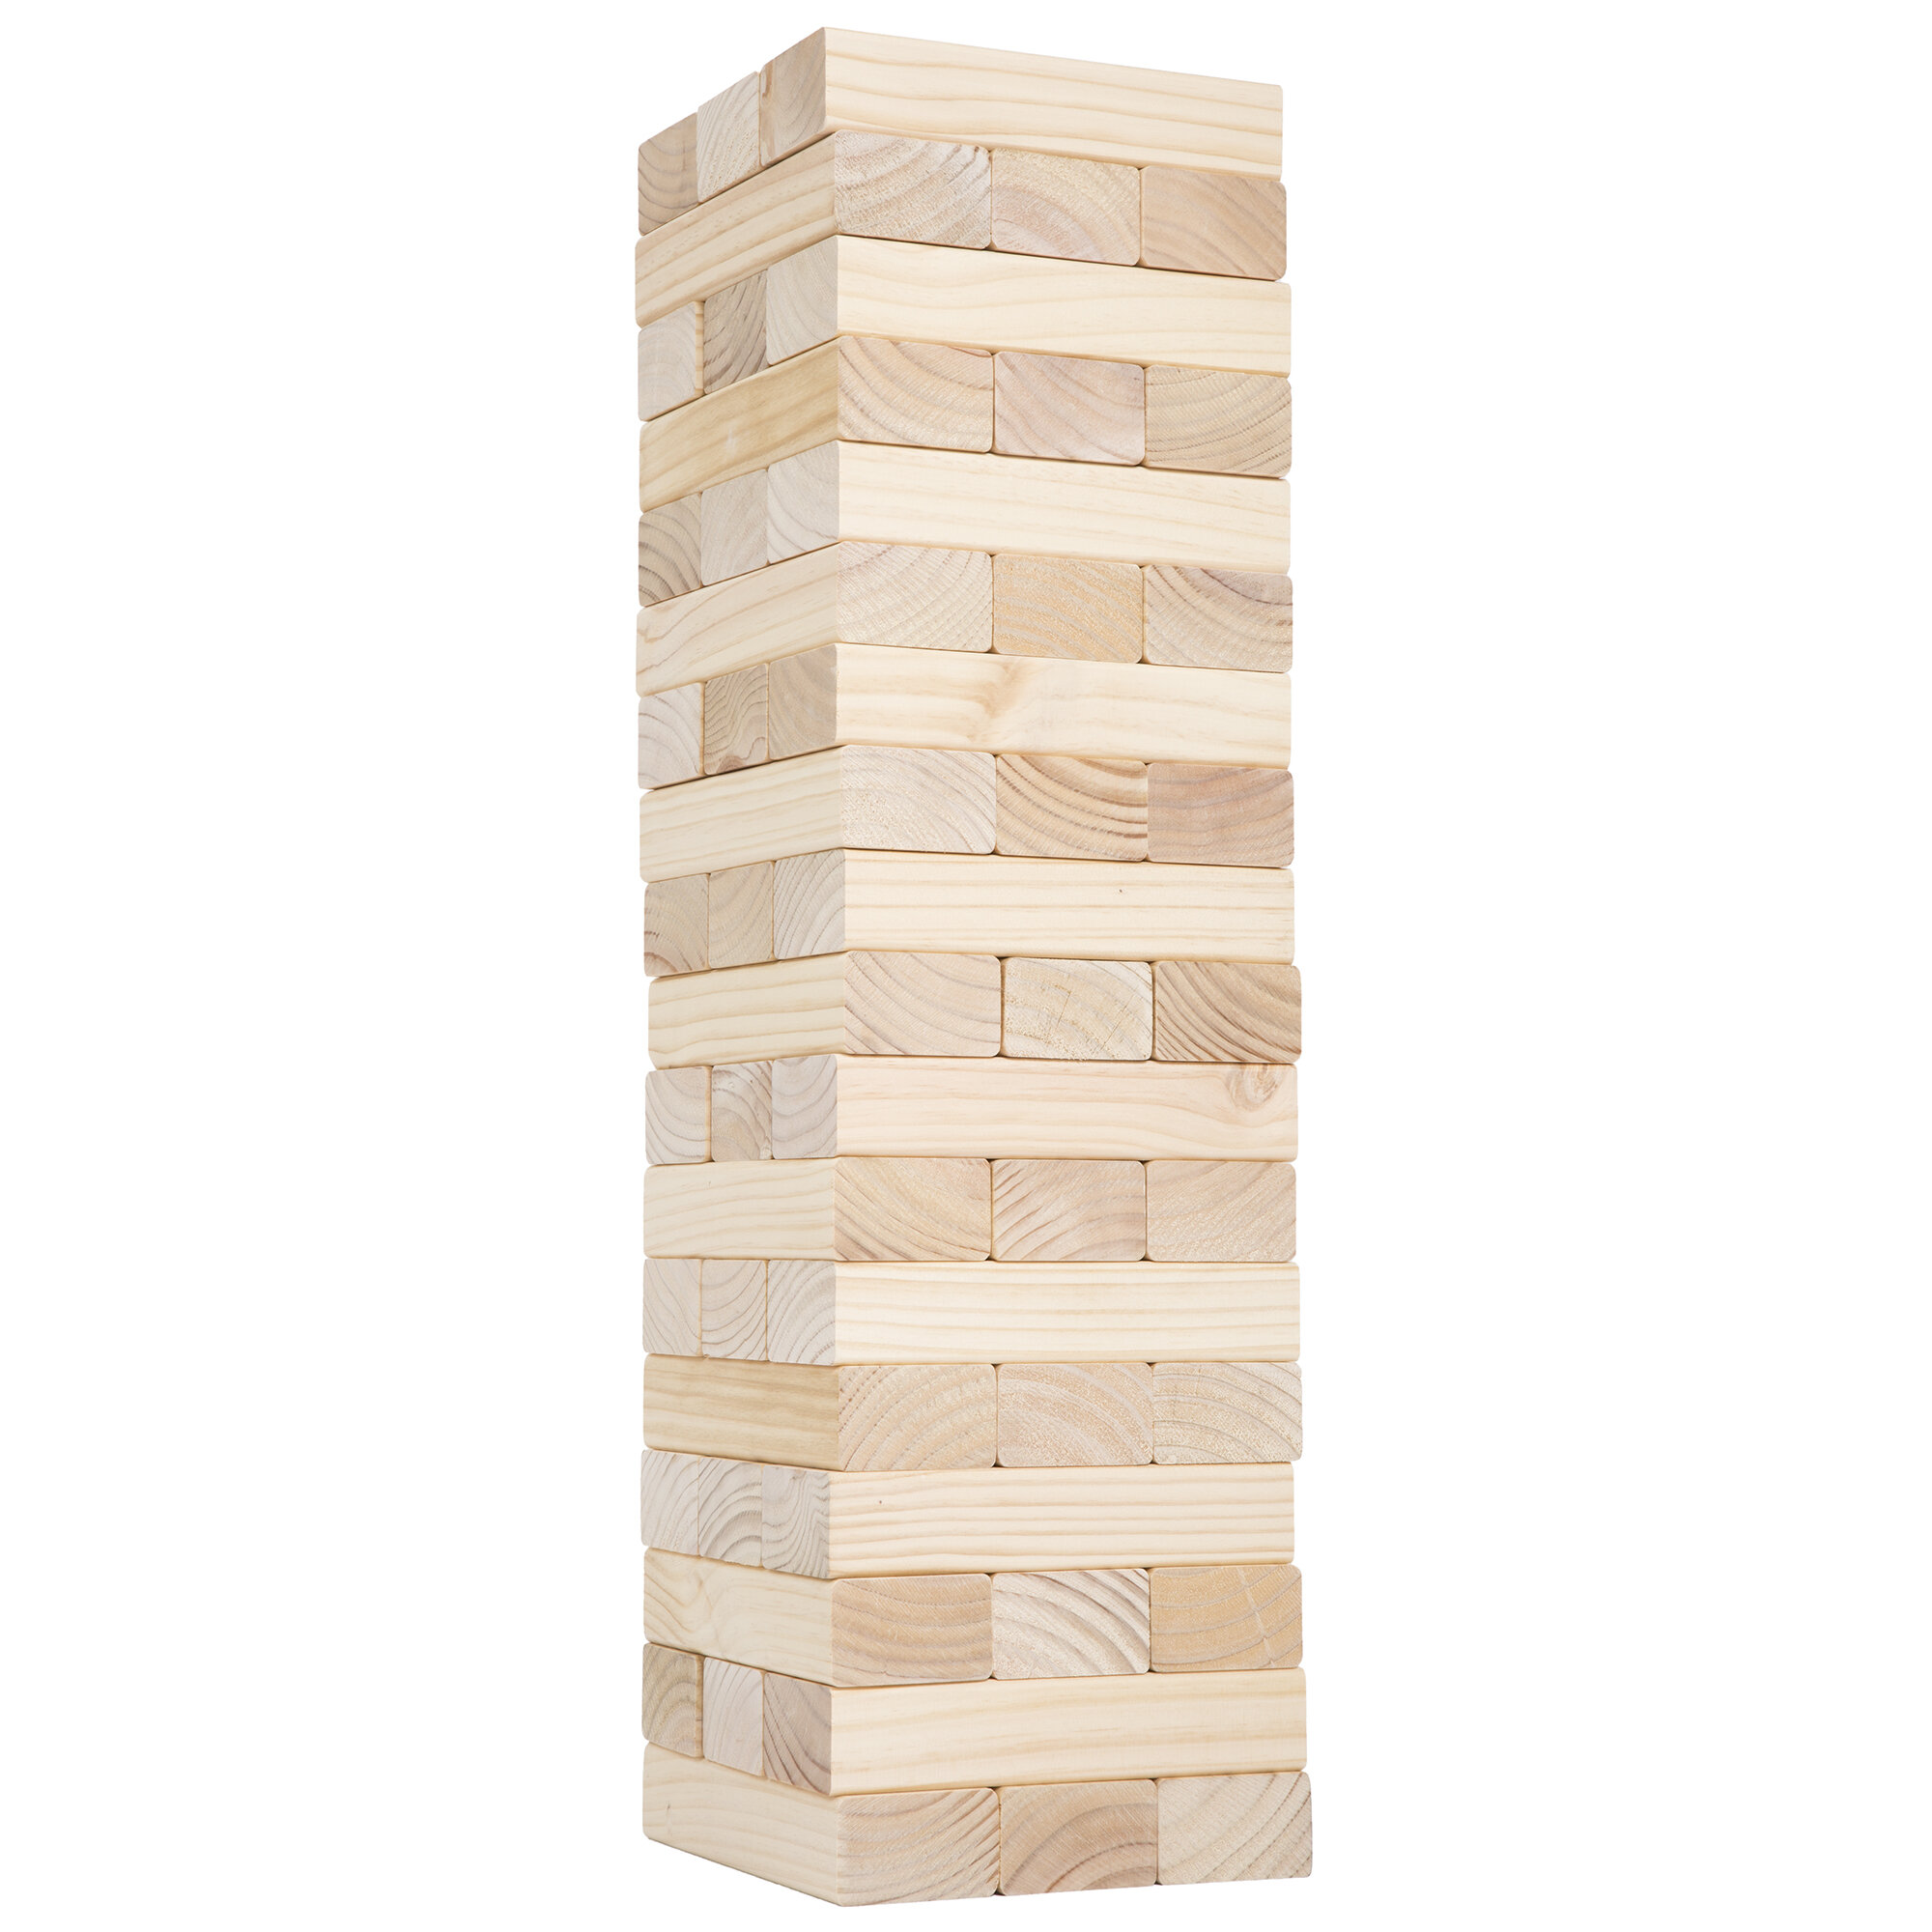 54 JENGA pieces Classic Game 3” L Wooden Blocks Tower Official Adult family  fun